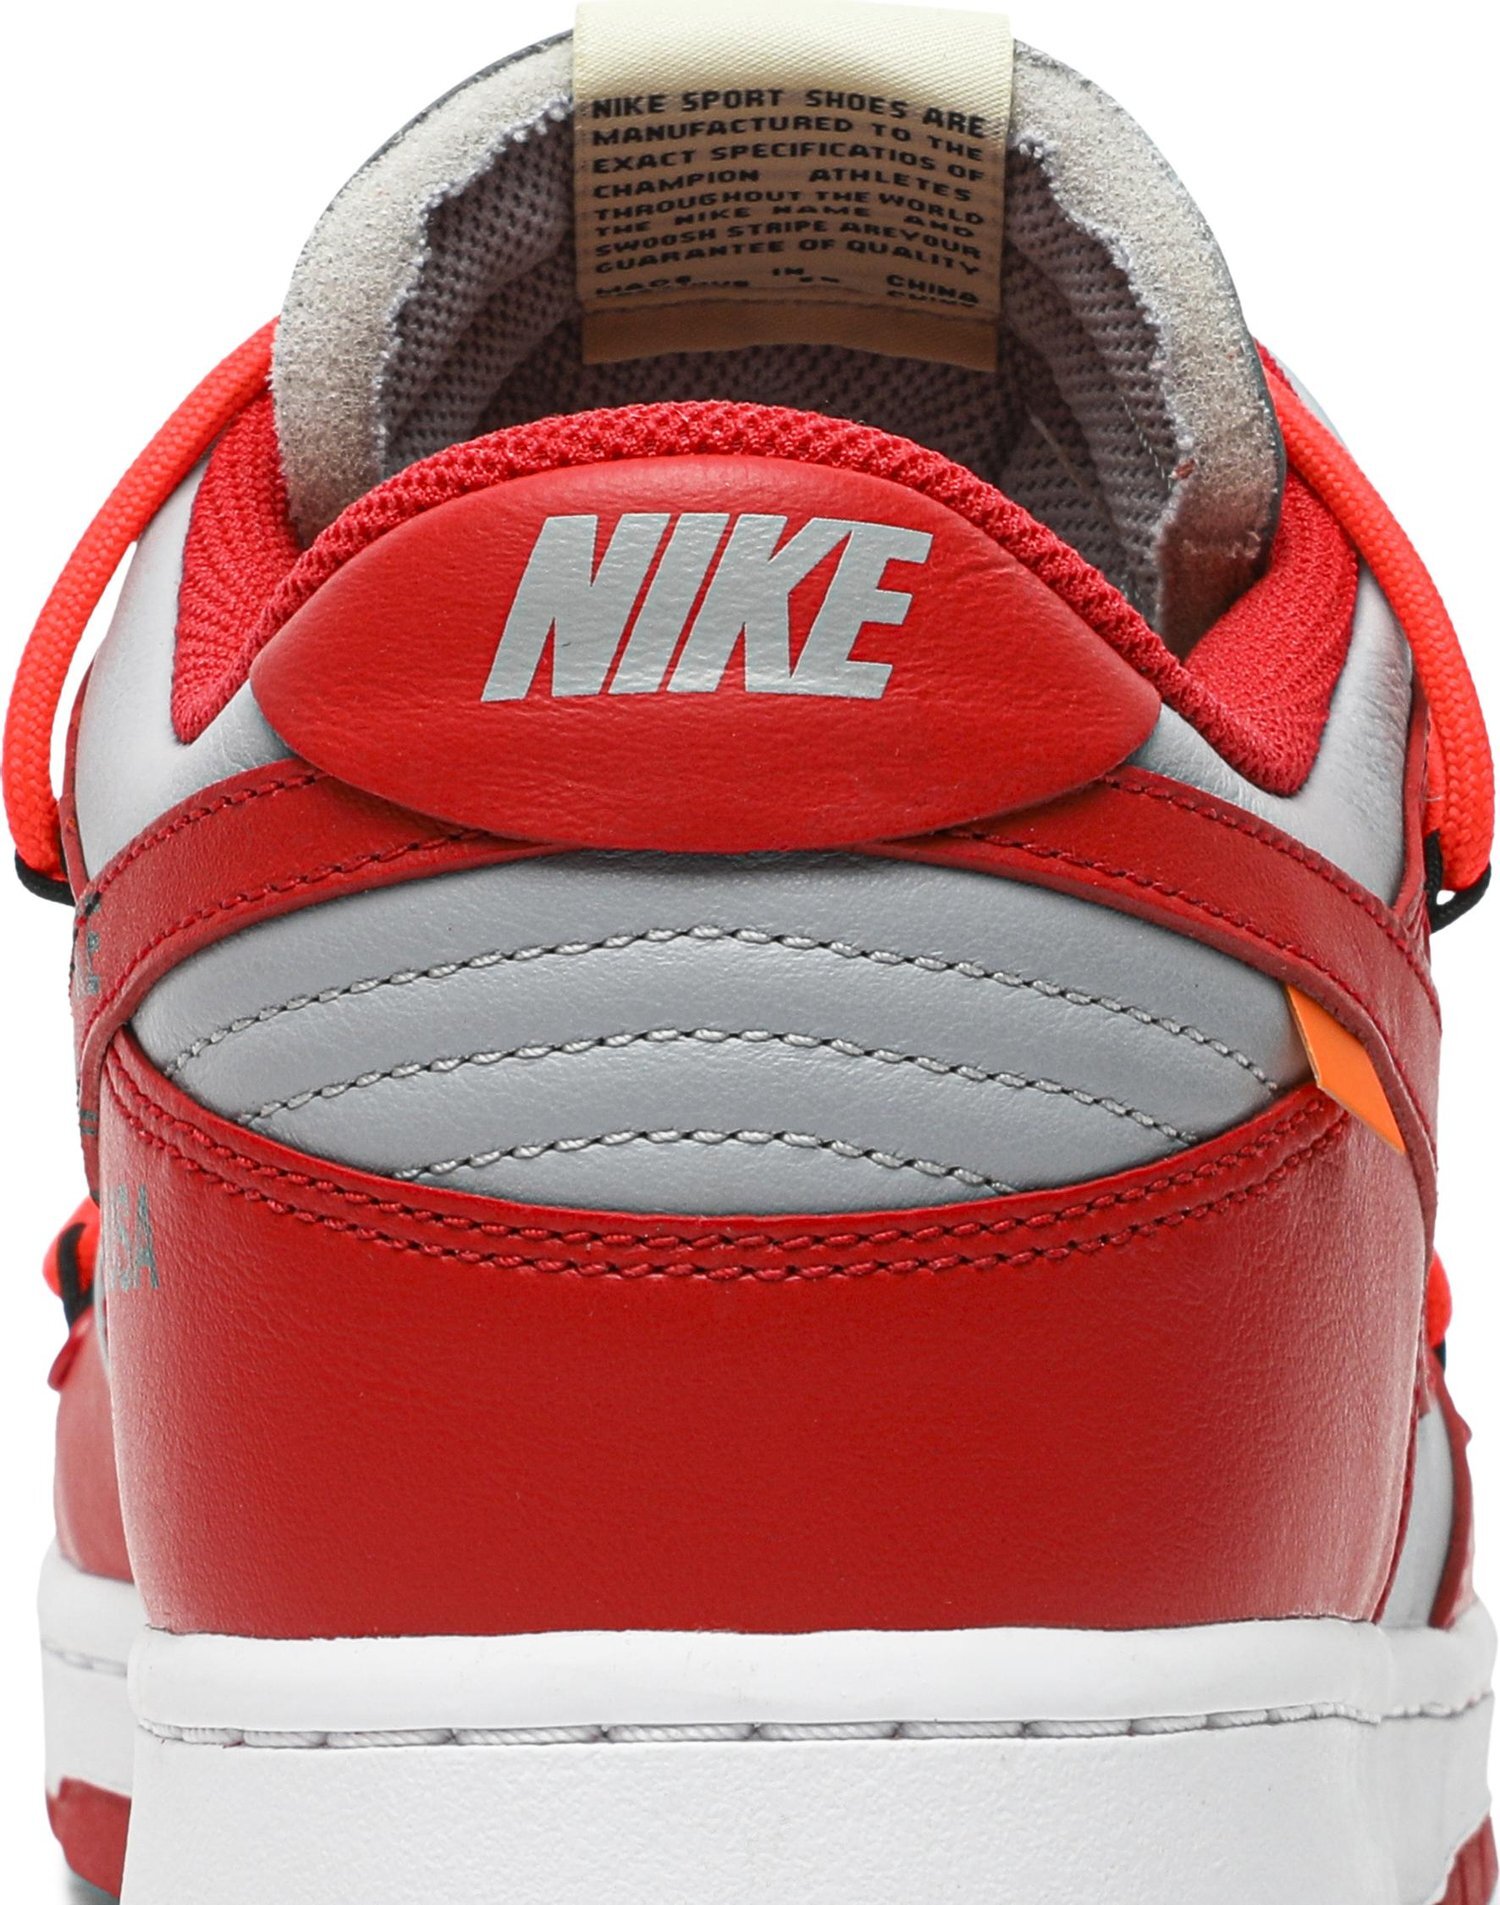 G5 Dunk Low Off-White University Red,CT0856-600